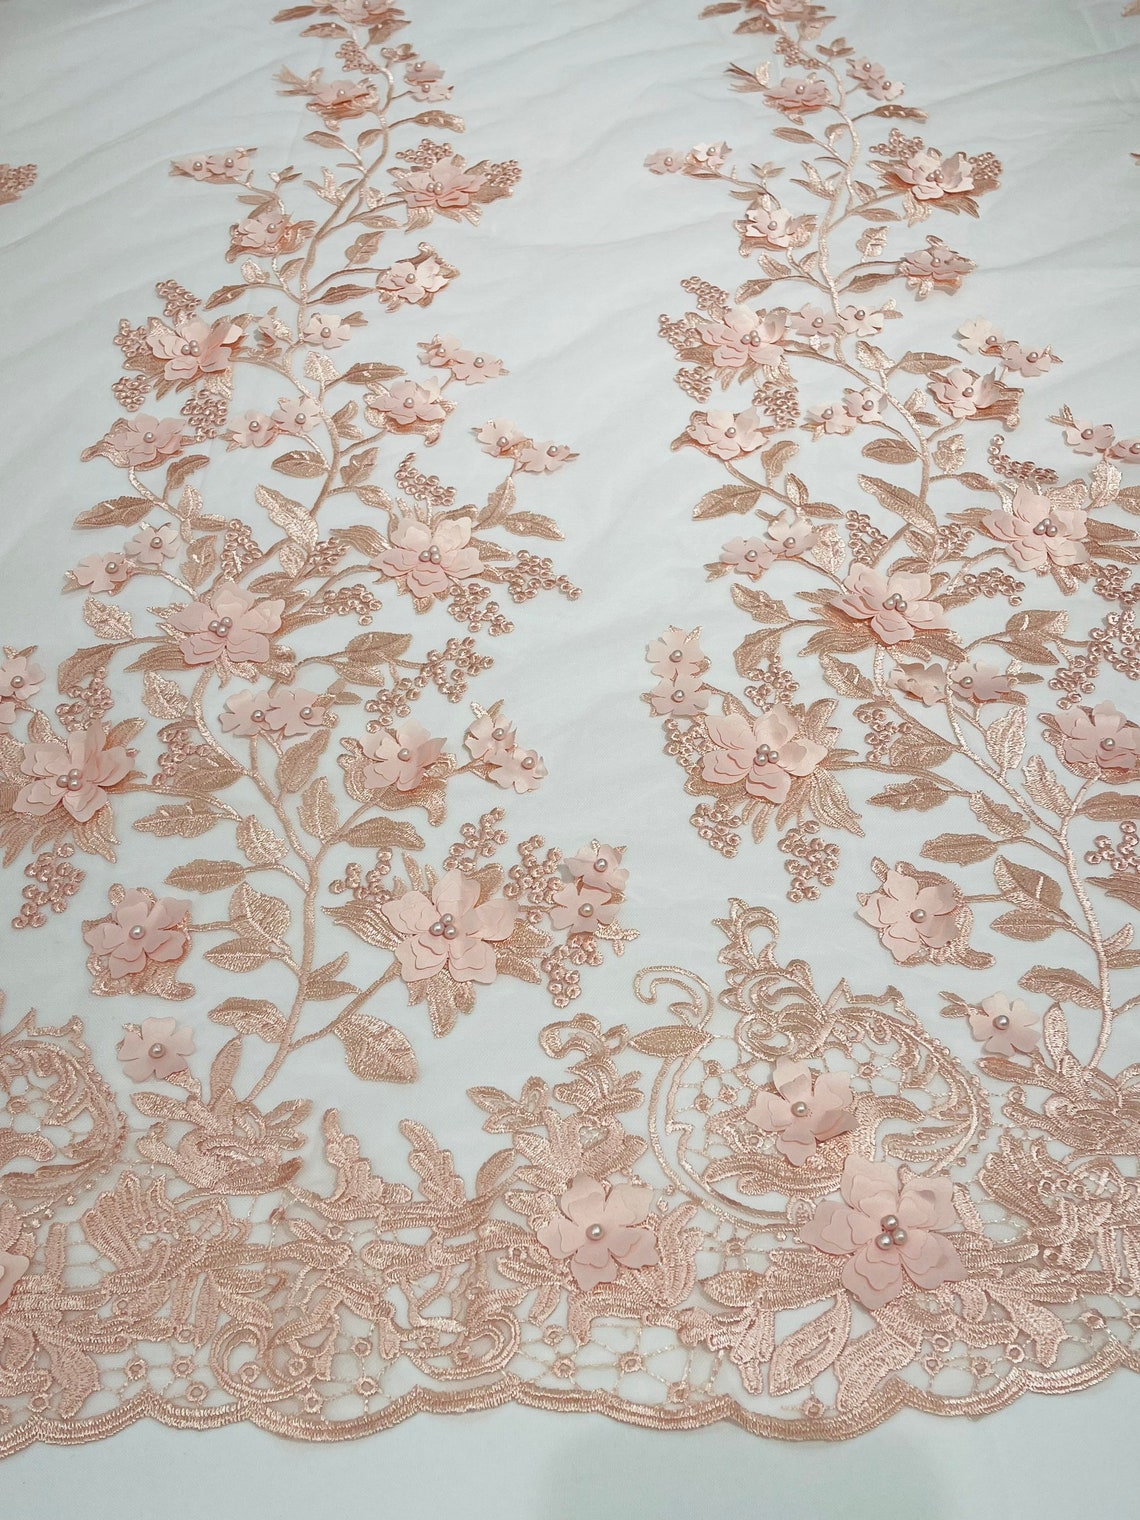 3D Floral Princess Fabric - Blush - Embroidered Floral Lace Fabric with 3D Flowers By Yard